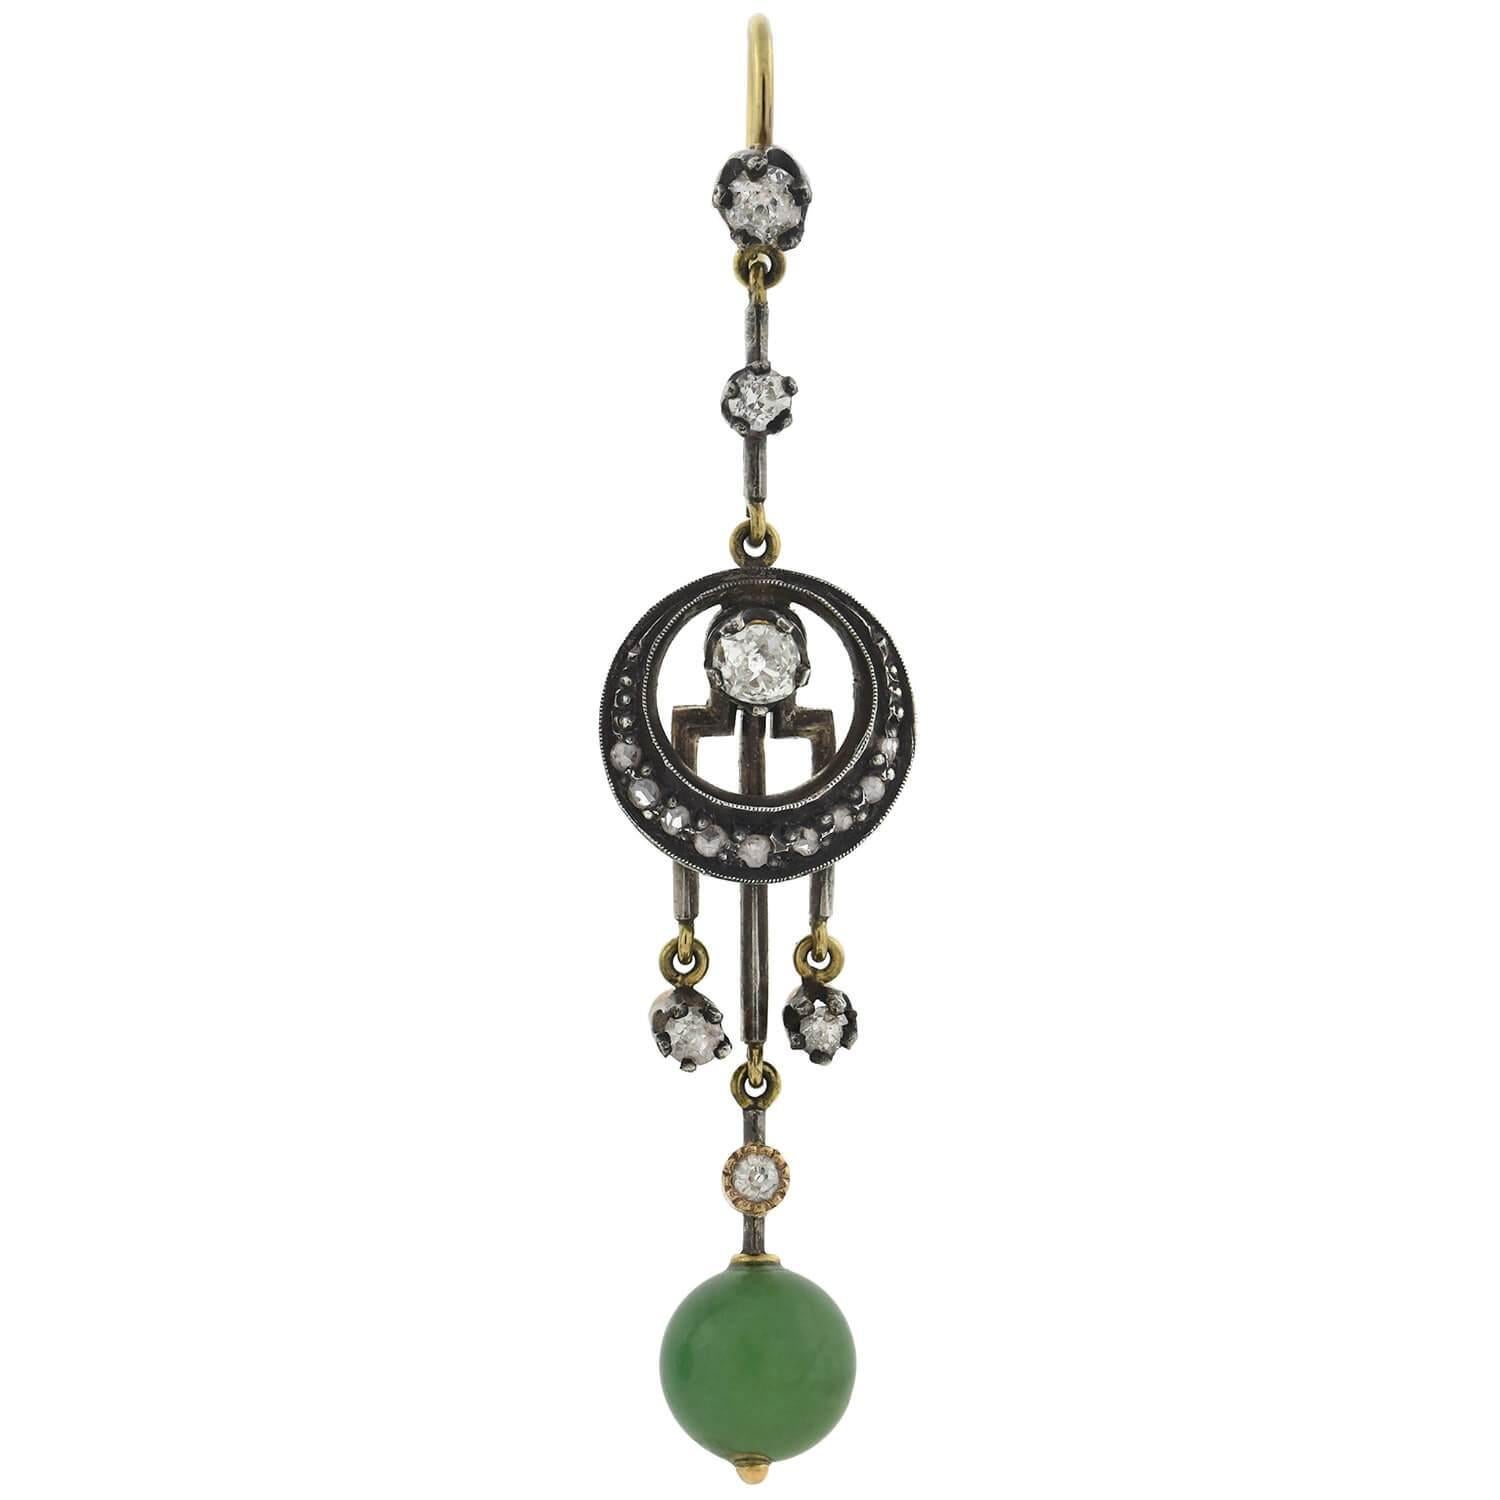 A gorgeous pair of jade and diamond earrings from the Victorian (1880s) era! Crafted in 14kt yellow gold and sterling silver, these dramatic earrings feature approximately 1.30ctw of old Mine and Rose Cut diamonds set within a unique setting. The